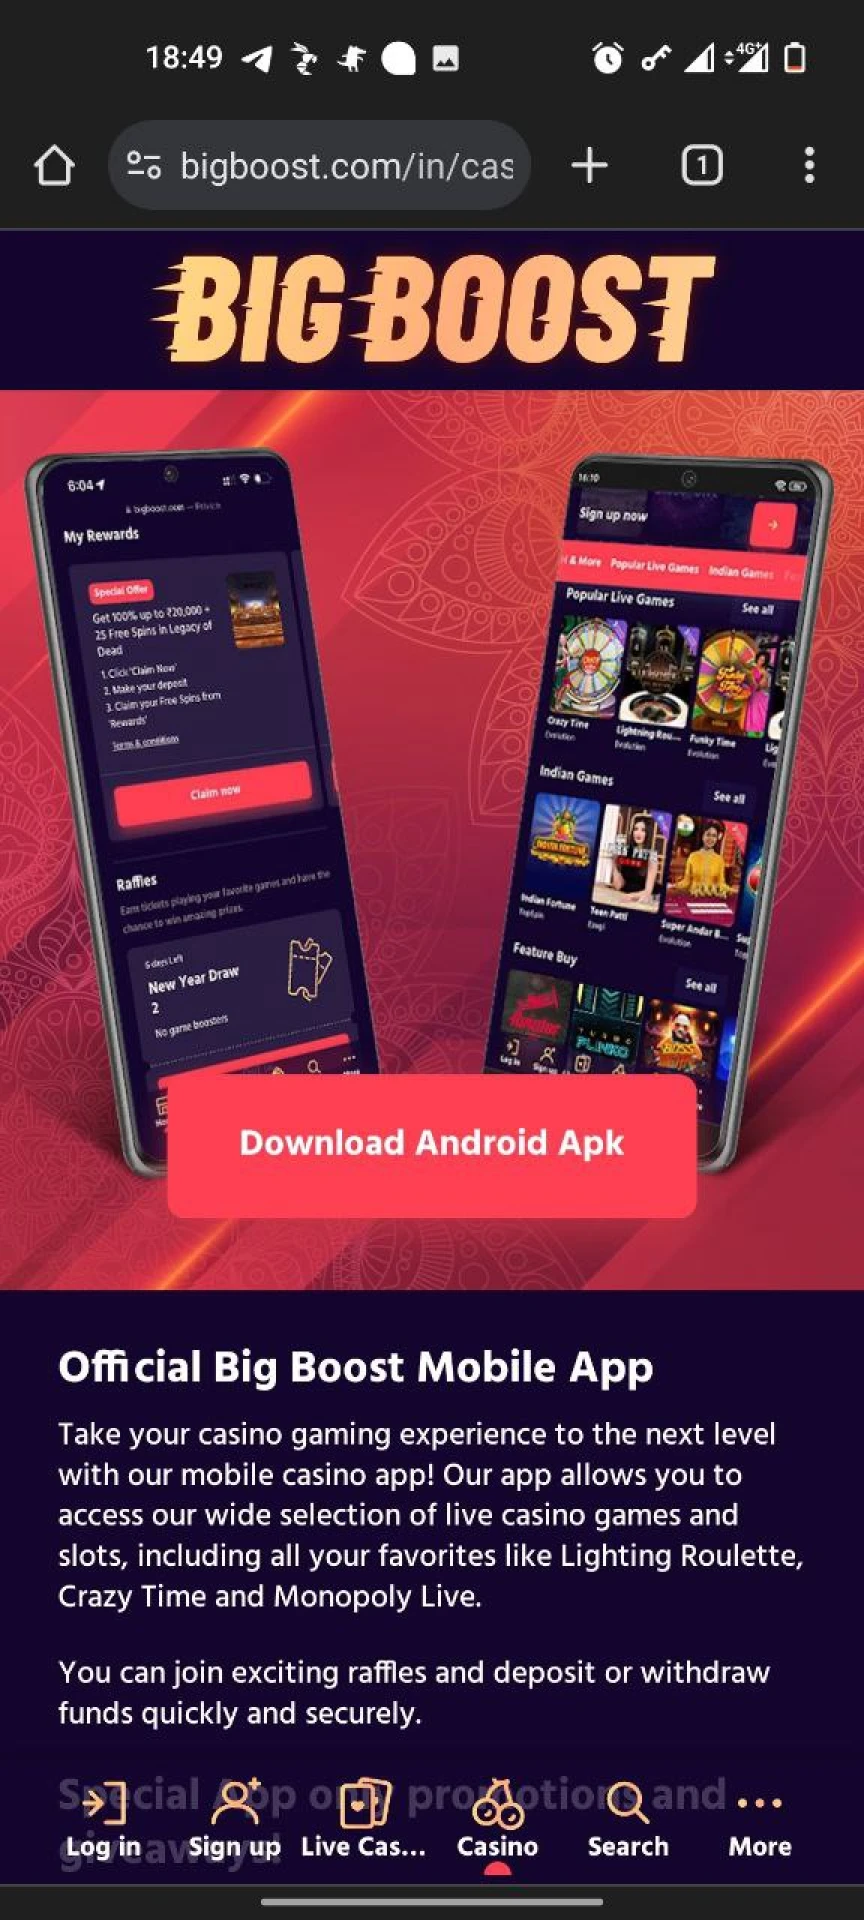 Start downloading the Big Boost application for Android.